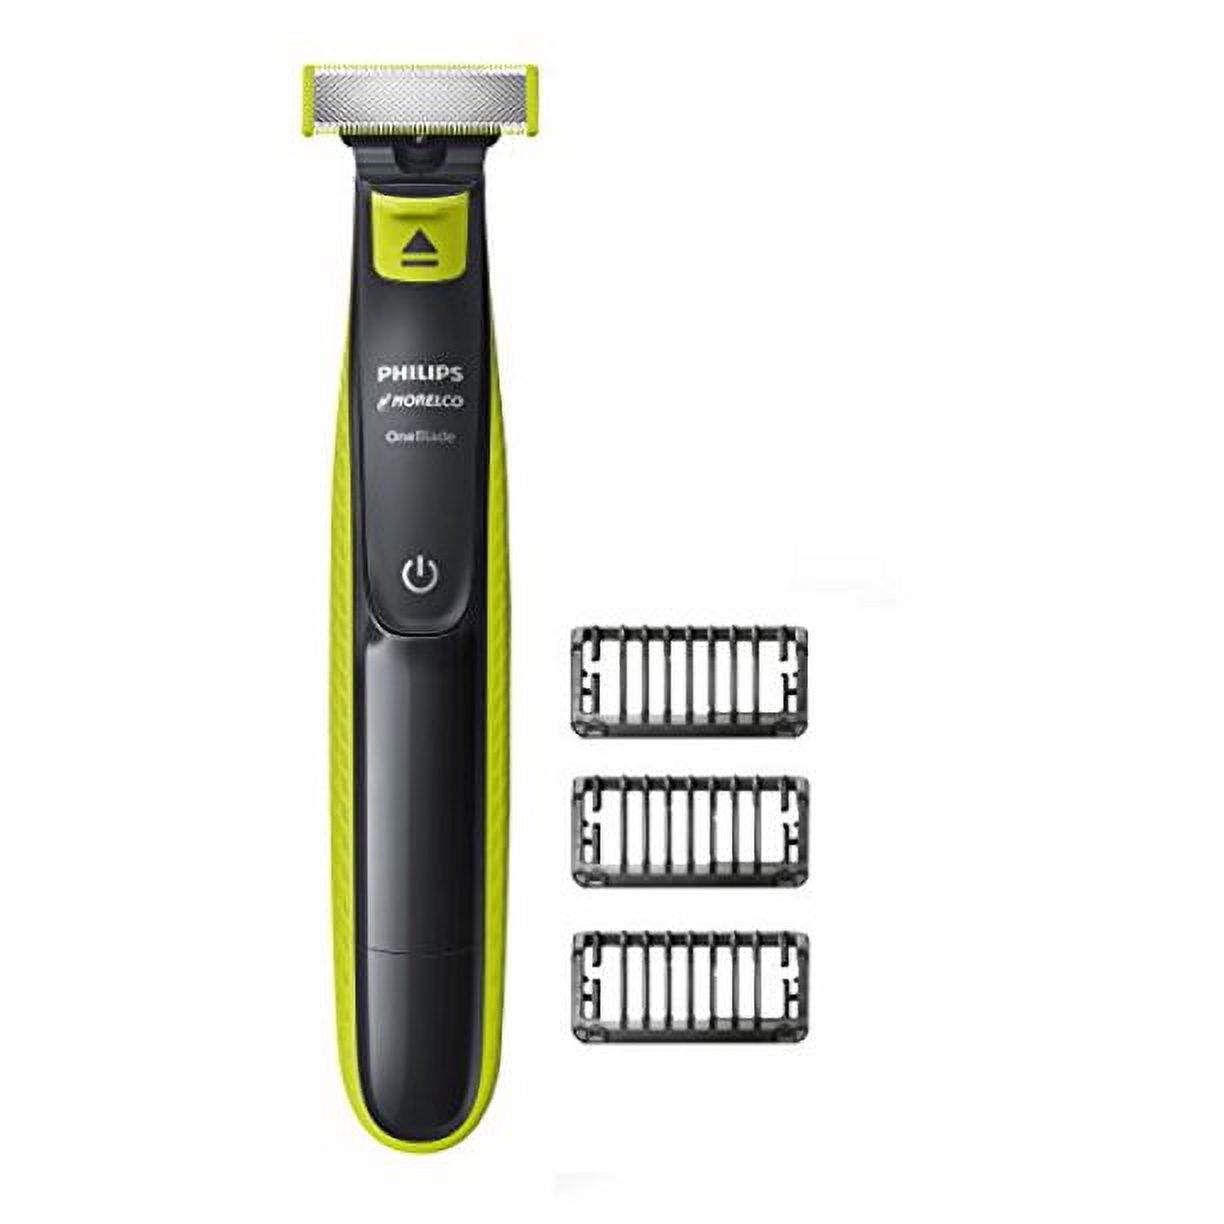 Philips Norelco OneBlade, Hybrid Electric Trimmer and Shaver, QP2520/70 - image 1 of 12